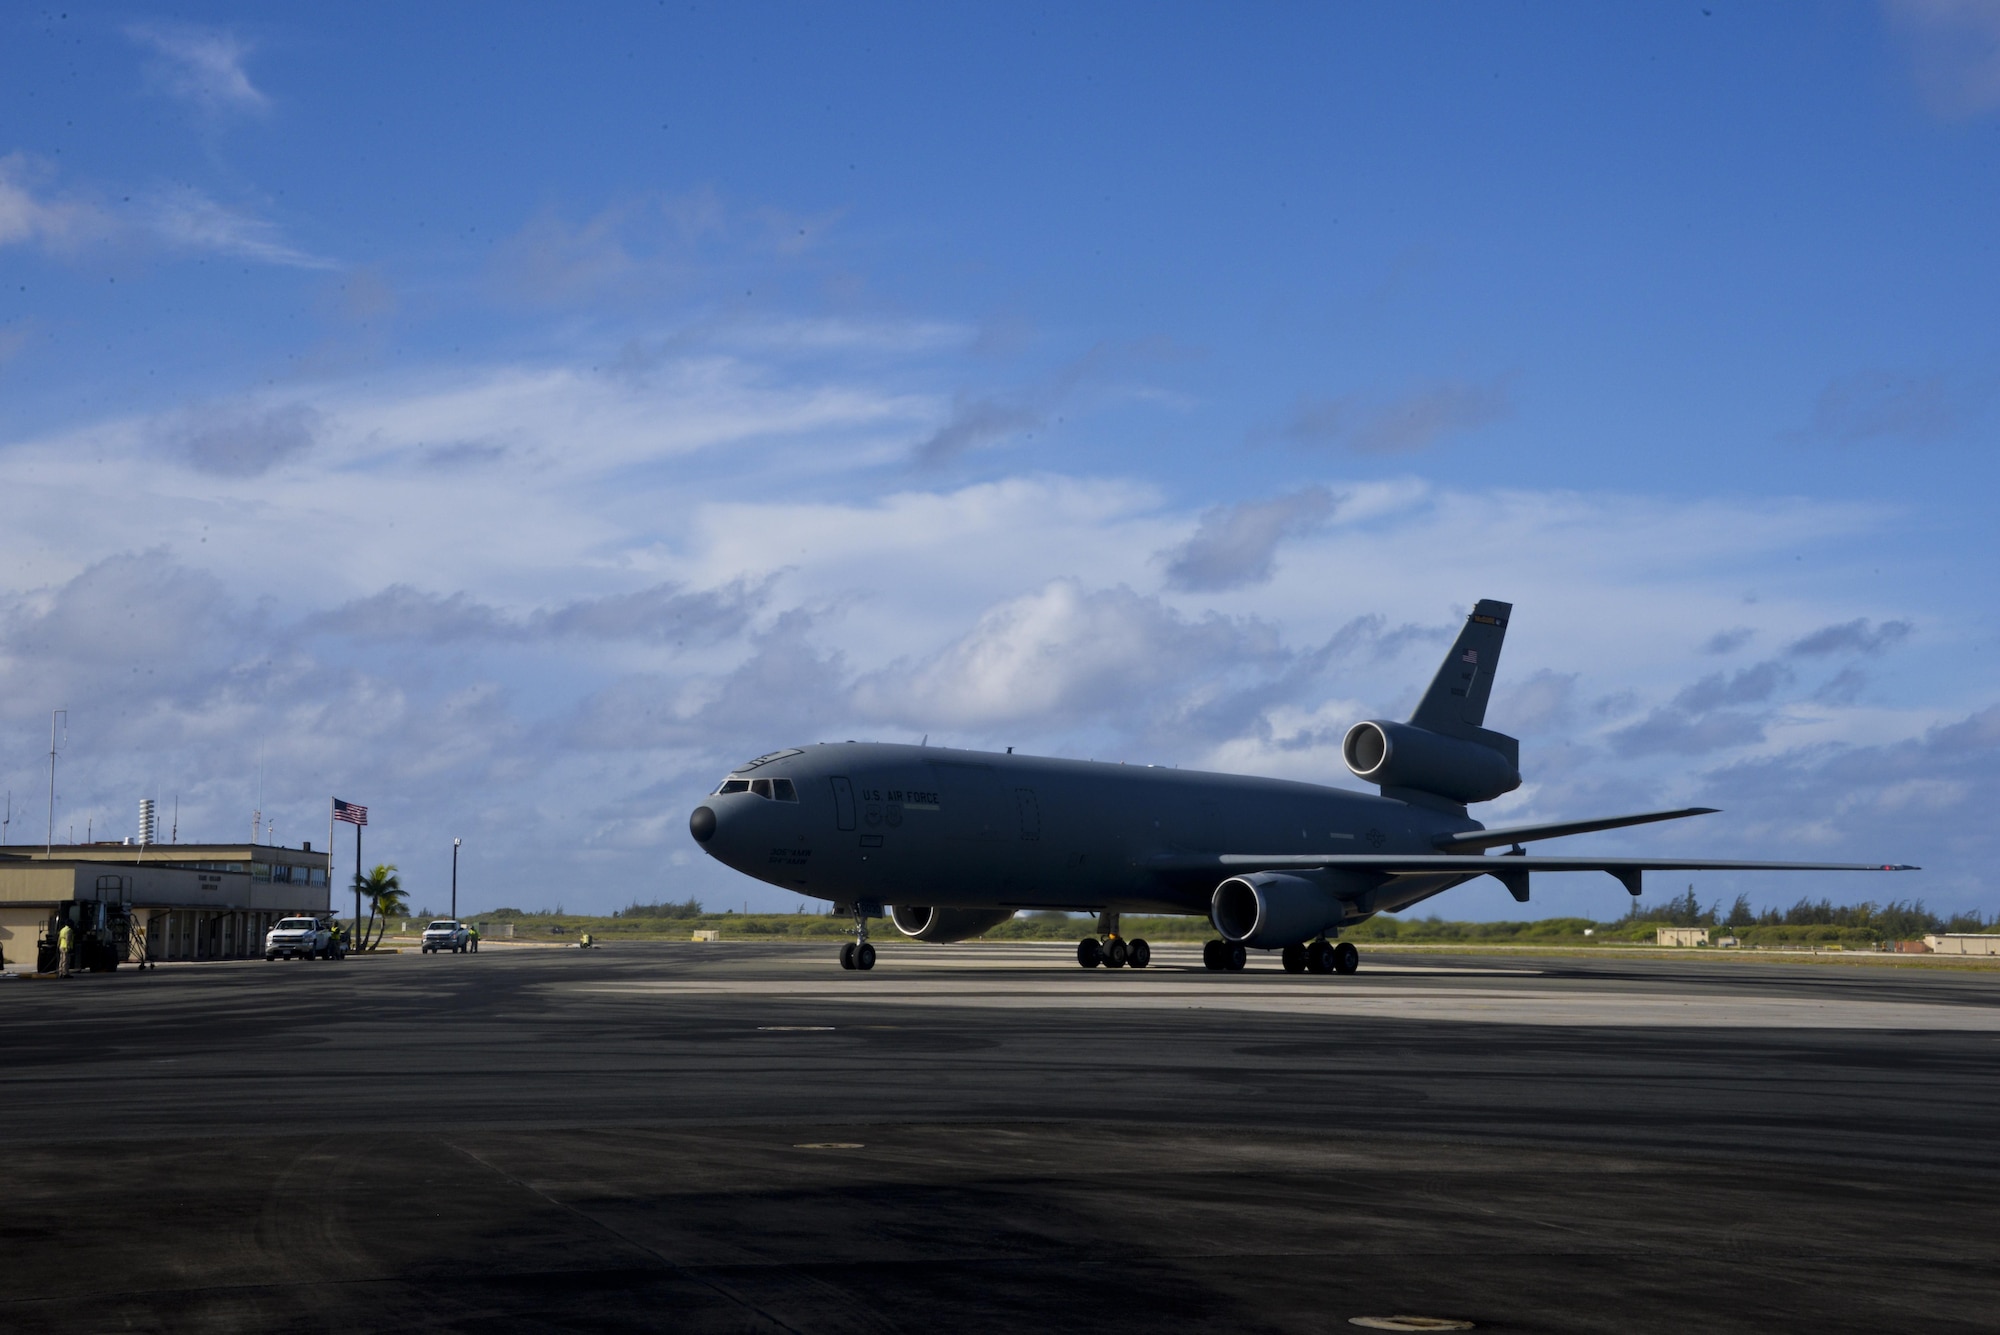 A KC-10 Extender taxis on the runway at Wake Island June 12, 2017. KC-10s from Travis Air Force Base, Calif., and Joint Base McGuire-Dix-Lakehurst, New Jersey, supported Exercise Talisman Saber 2017 by executing Exercise Ultimate Reach, a strategic refueling and airdrop mission in which three KC-10s refueled five C-17 Globemaster IIIs carrying U.S. Army, Australian and Canadian paratroopers prior to an airdrop. TS 17 is a biennial exercise in Australia that focuses on bilateral military training between U.S. Pacific Command forces and the Australian Defence Force to improve U.S.-Australia combat readiness, increase interoperability, maximize combined training opportunities and conduct maritime prepositioning and logistics operations in the Pacific. (U.S. Air Force photo by 2nd Lt. Sarah Johnson)